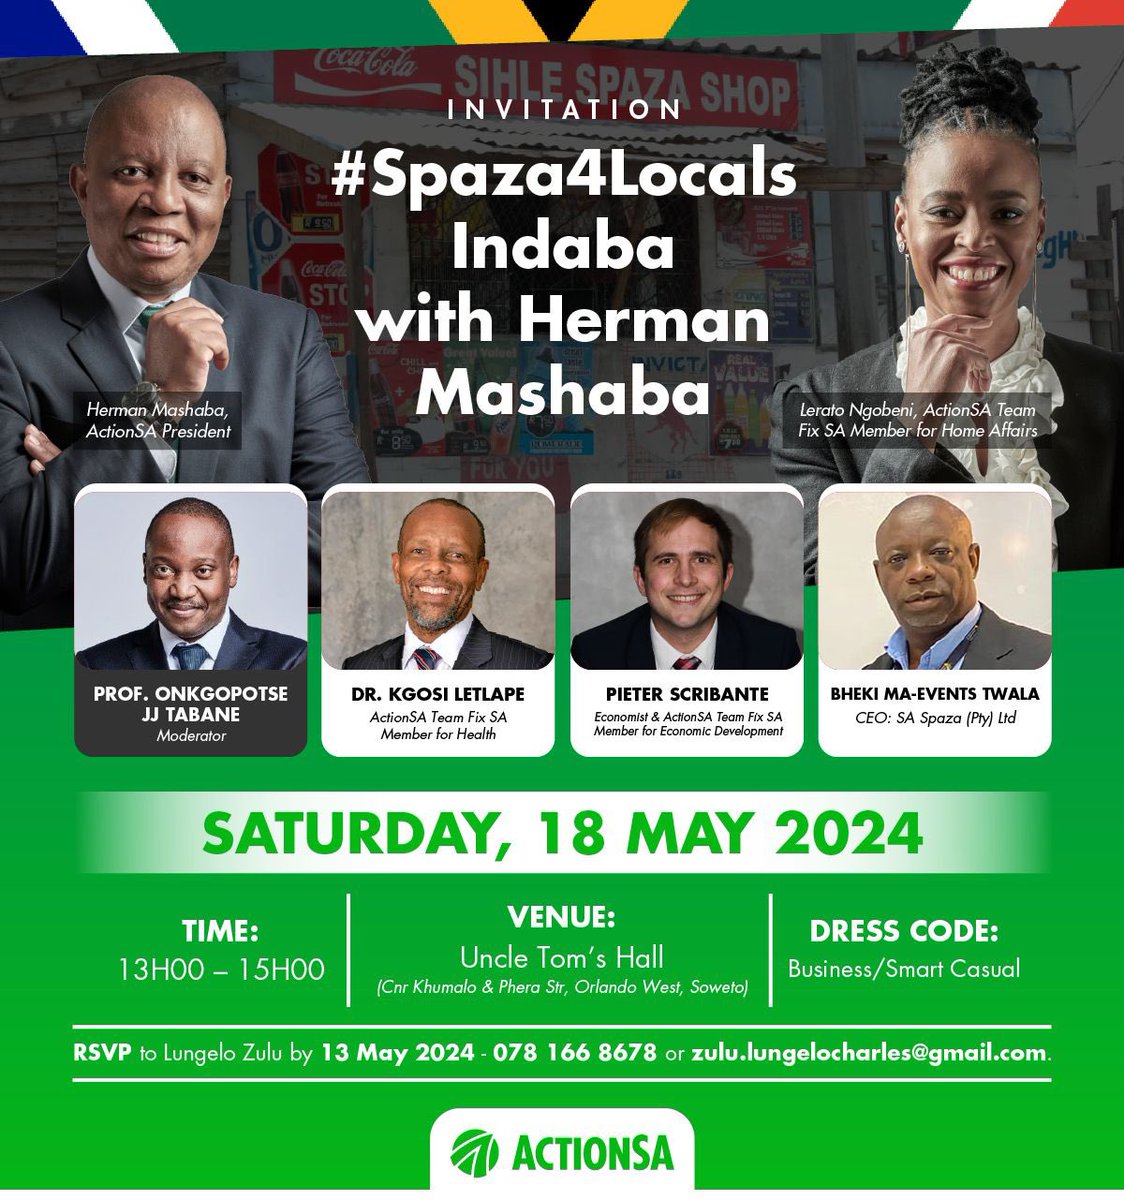 Join us next week for the #Spaza4Locals indaba in #Soweto! #ActionSA proudly prioritises South African owned businesses which help create wealth in our communities.